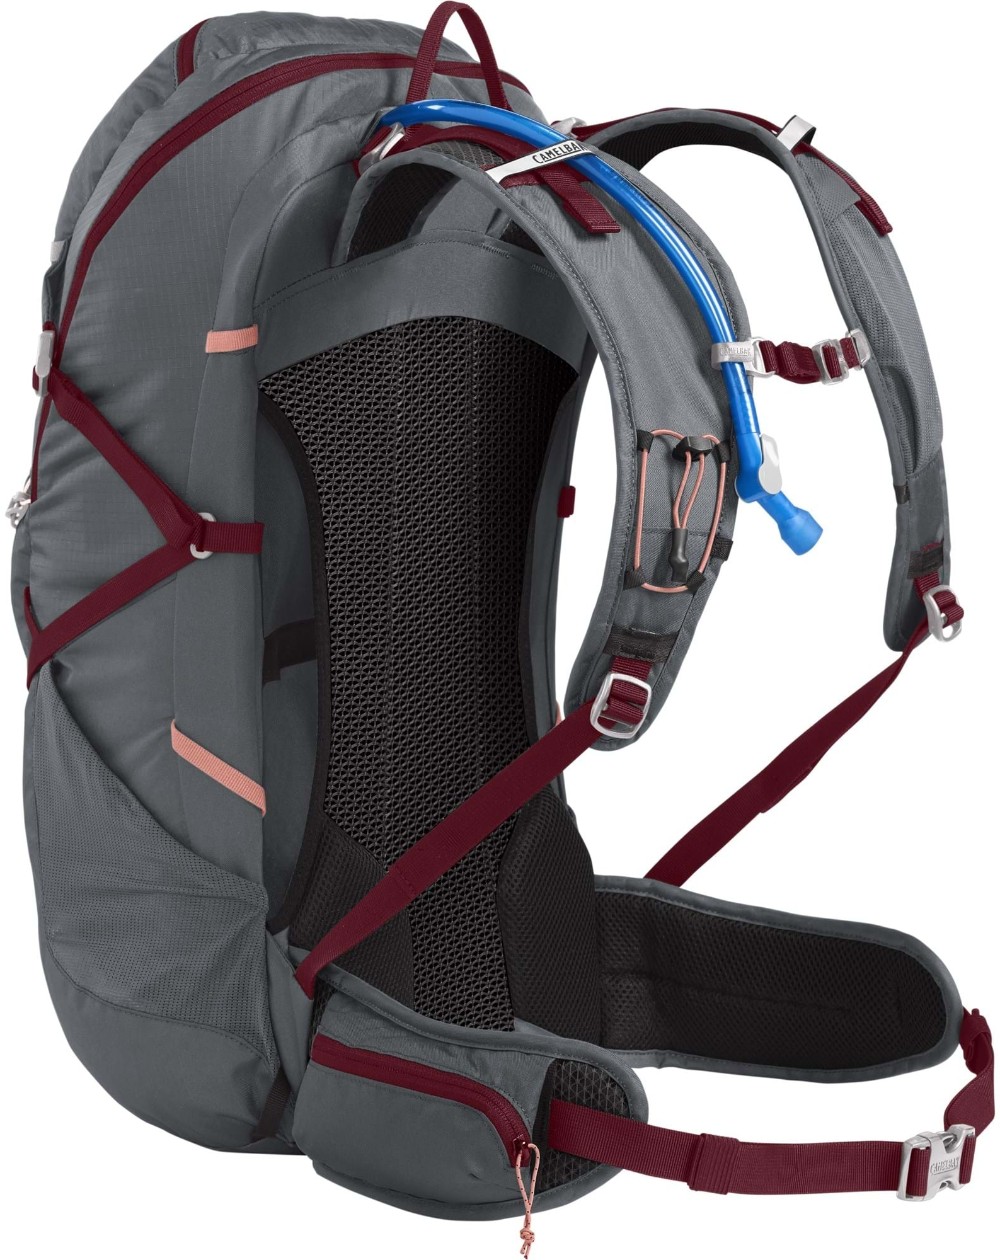 Fourteener 30L Womens Hydration Pack with 3L Reservoir image 1